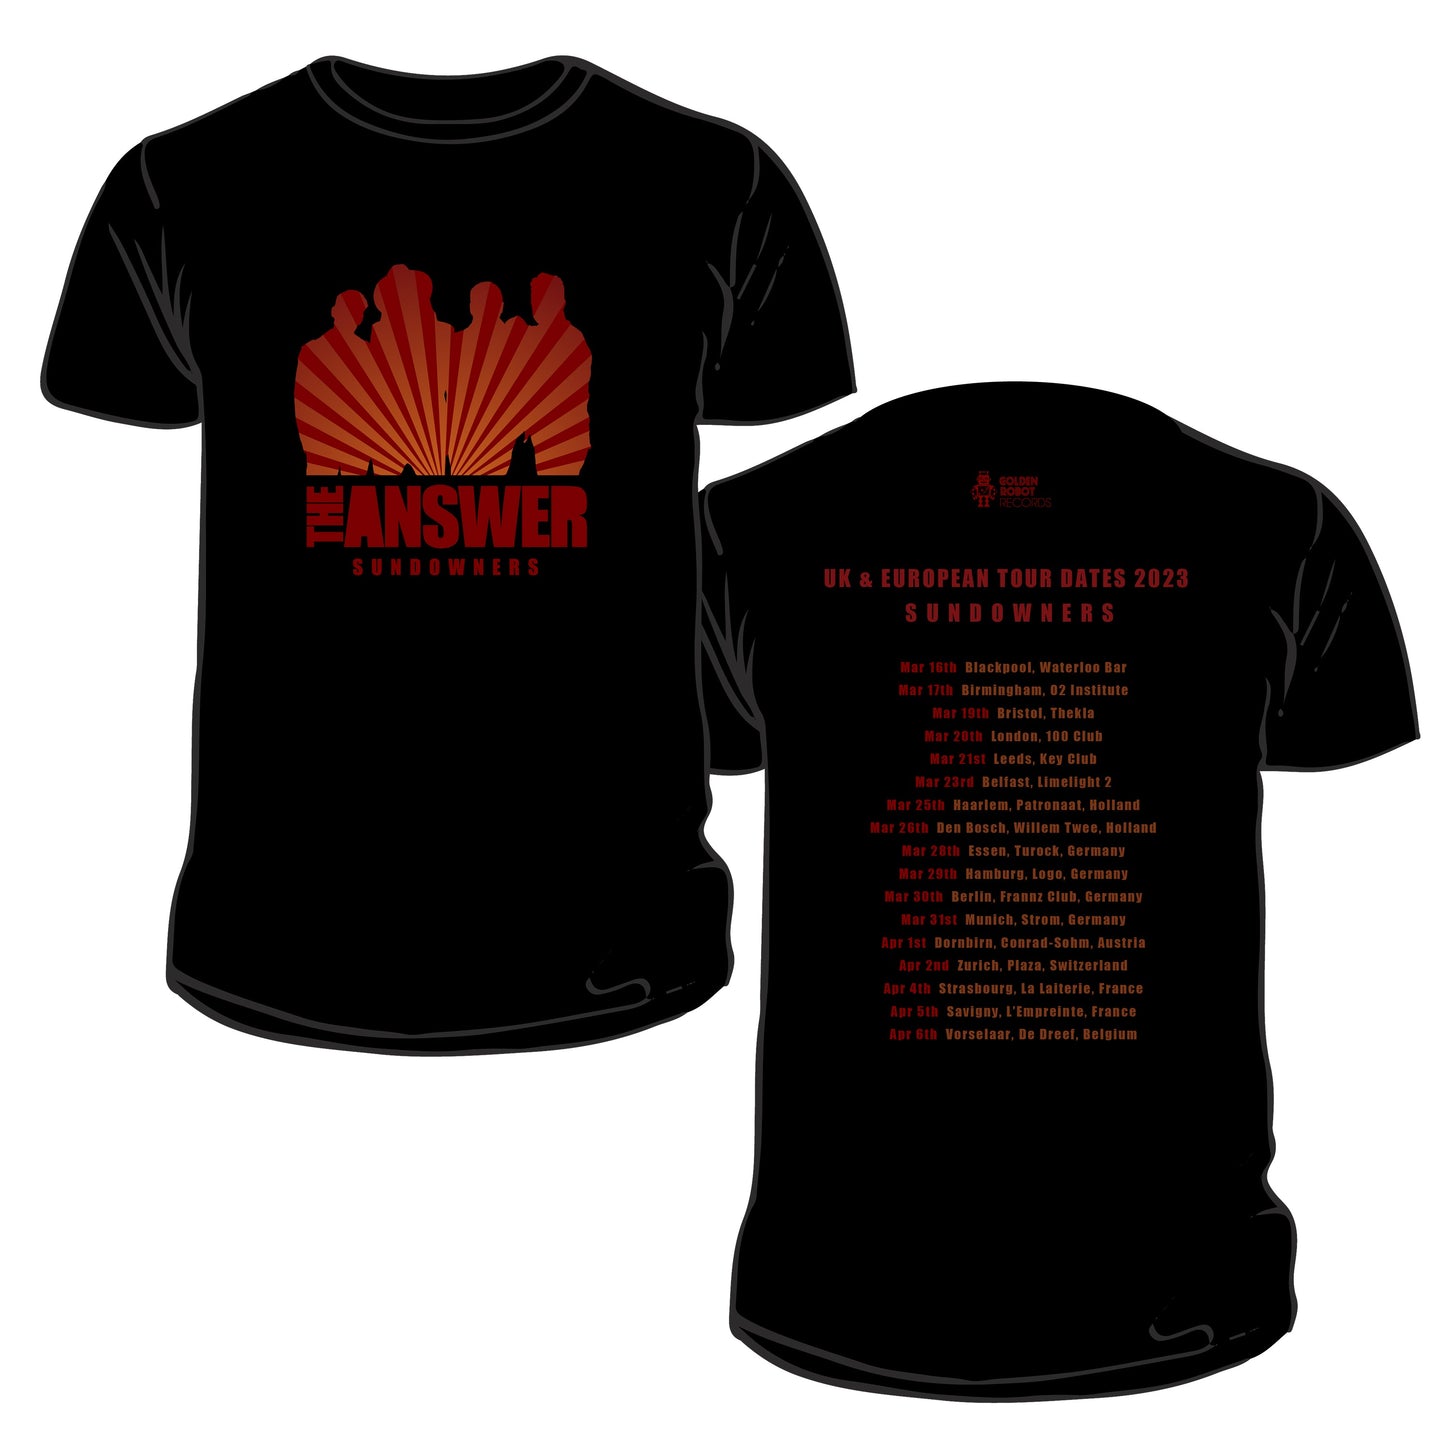 PRE-ORDER - The Answer 'Sundowners' Signed CD, Download, Tote Bag & Tour T-Shirt Bundle - RELEASE DATE 17th March 2023